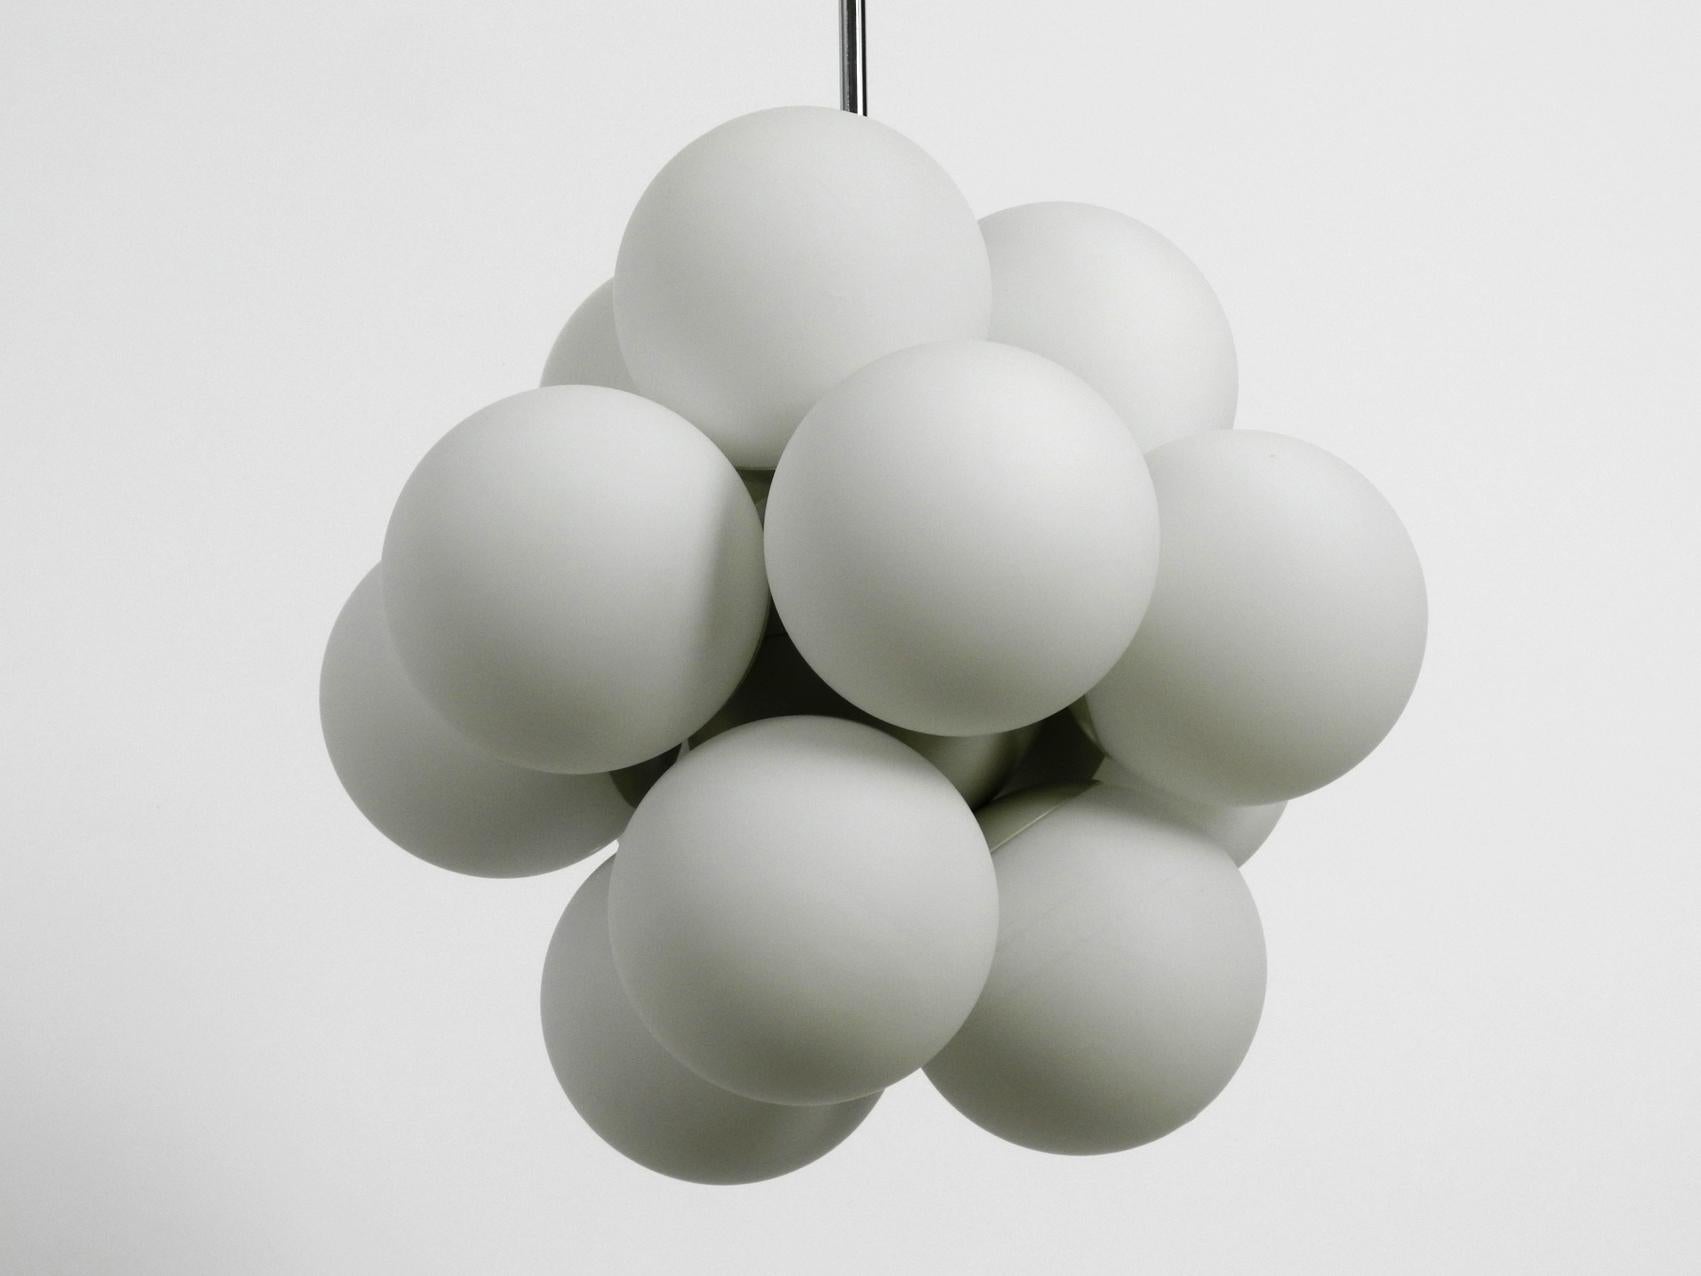 Unused 1960s Atomic Space Age Kaiser Leuchten Ceiling Lamp with 12 Glass Balls 1